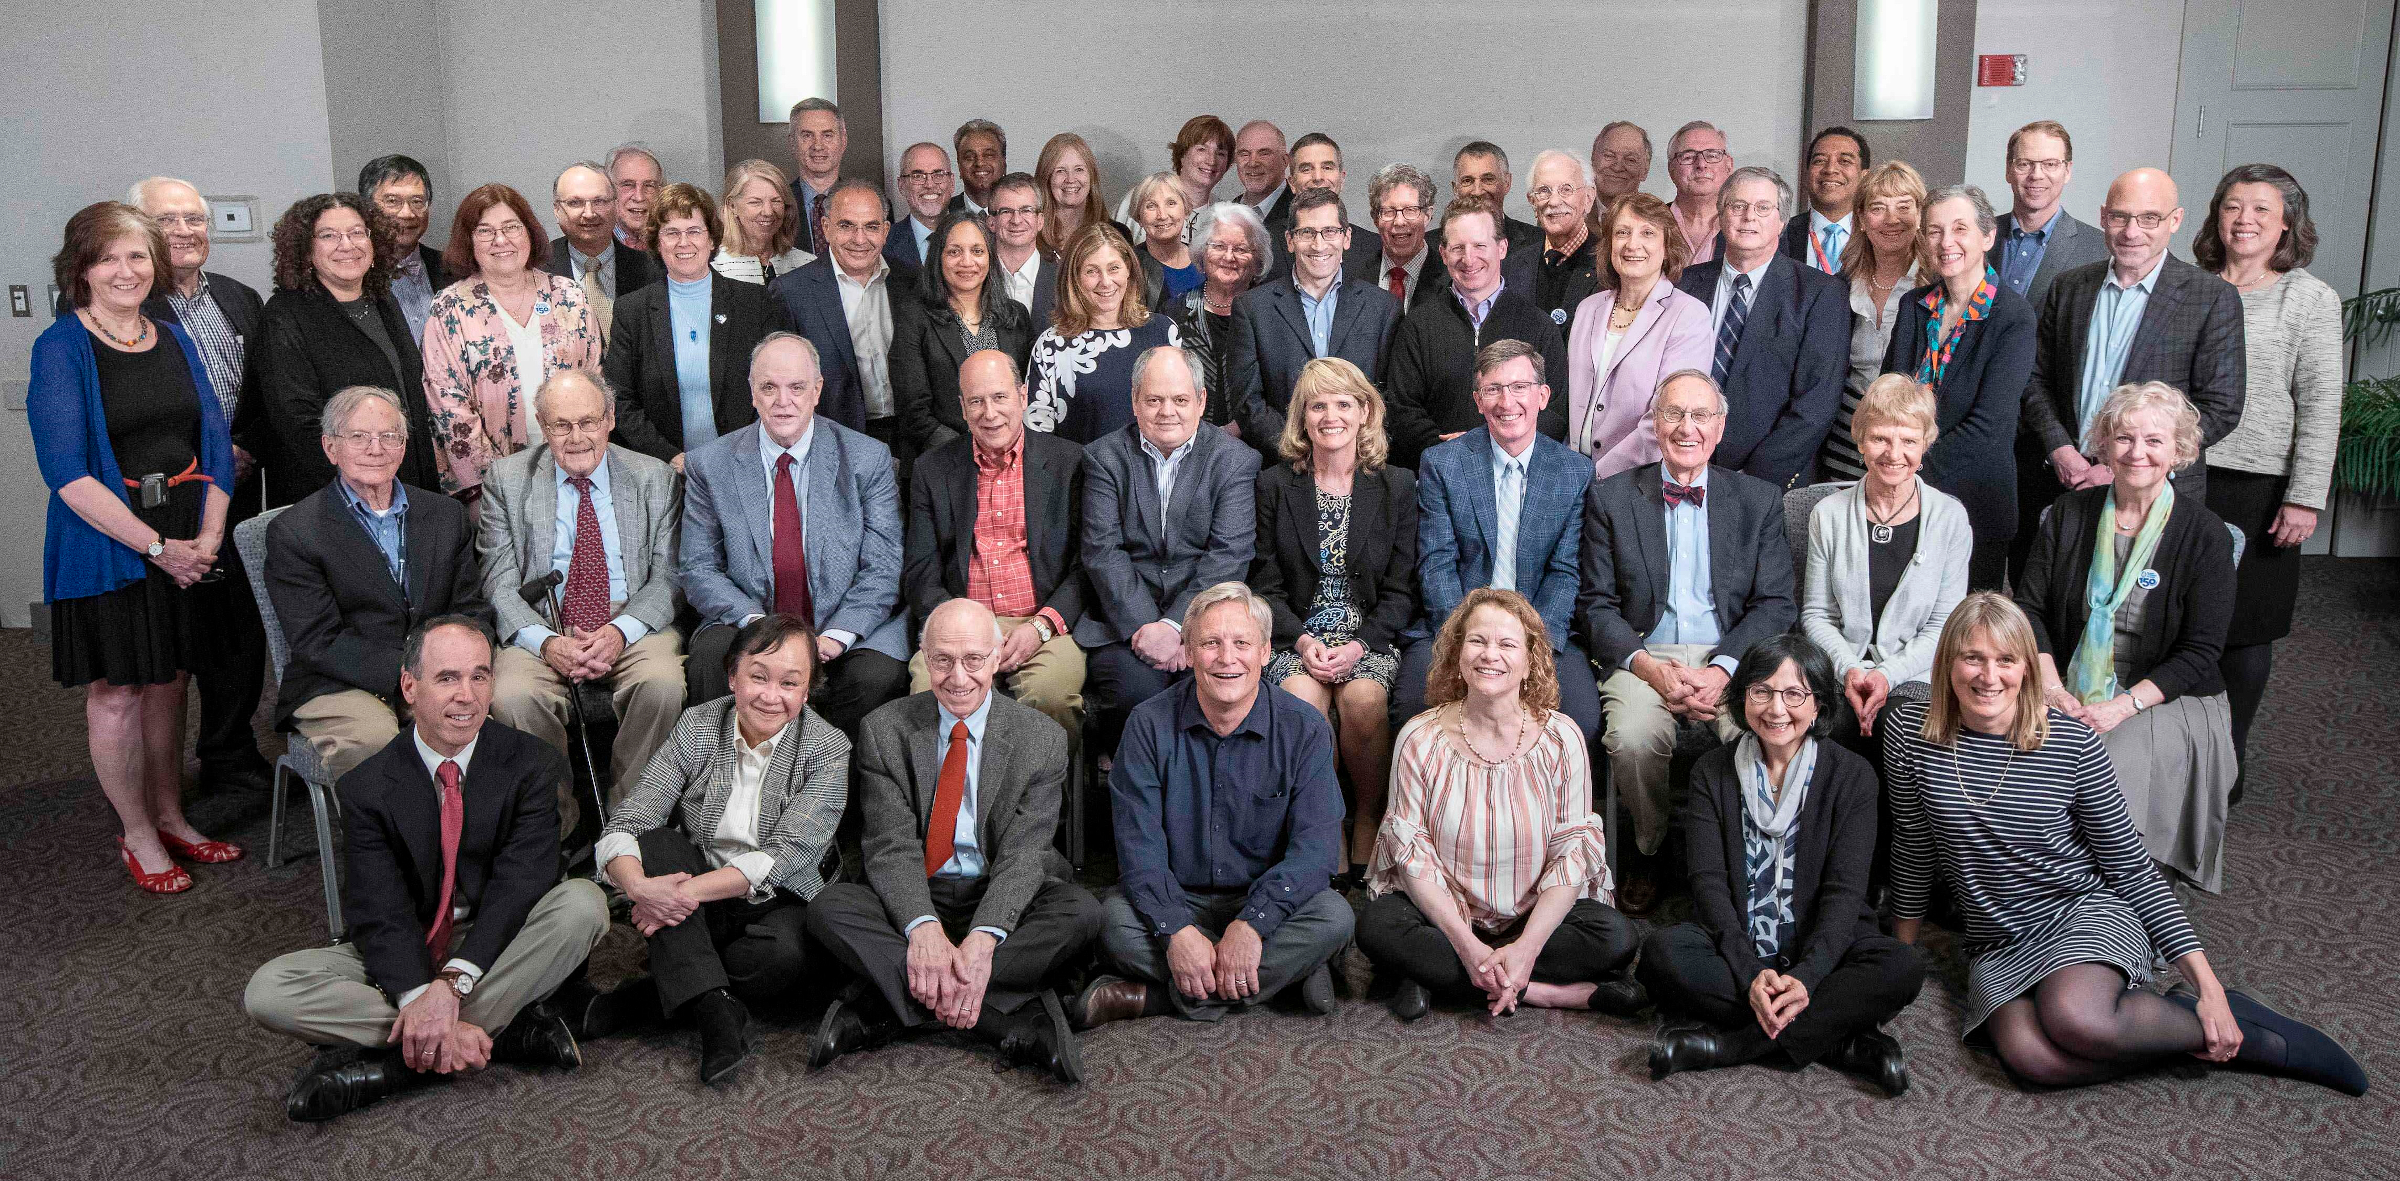 Alumni Association members pose for a photo